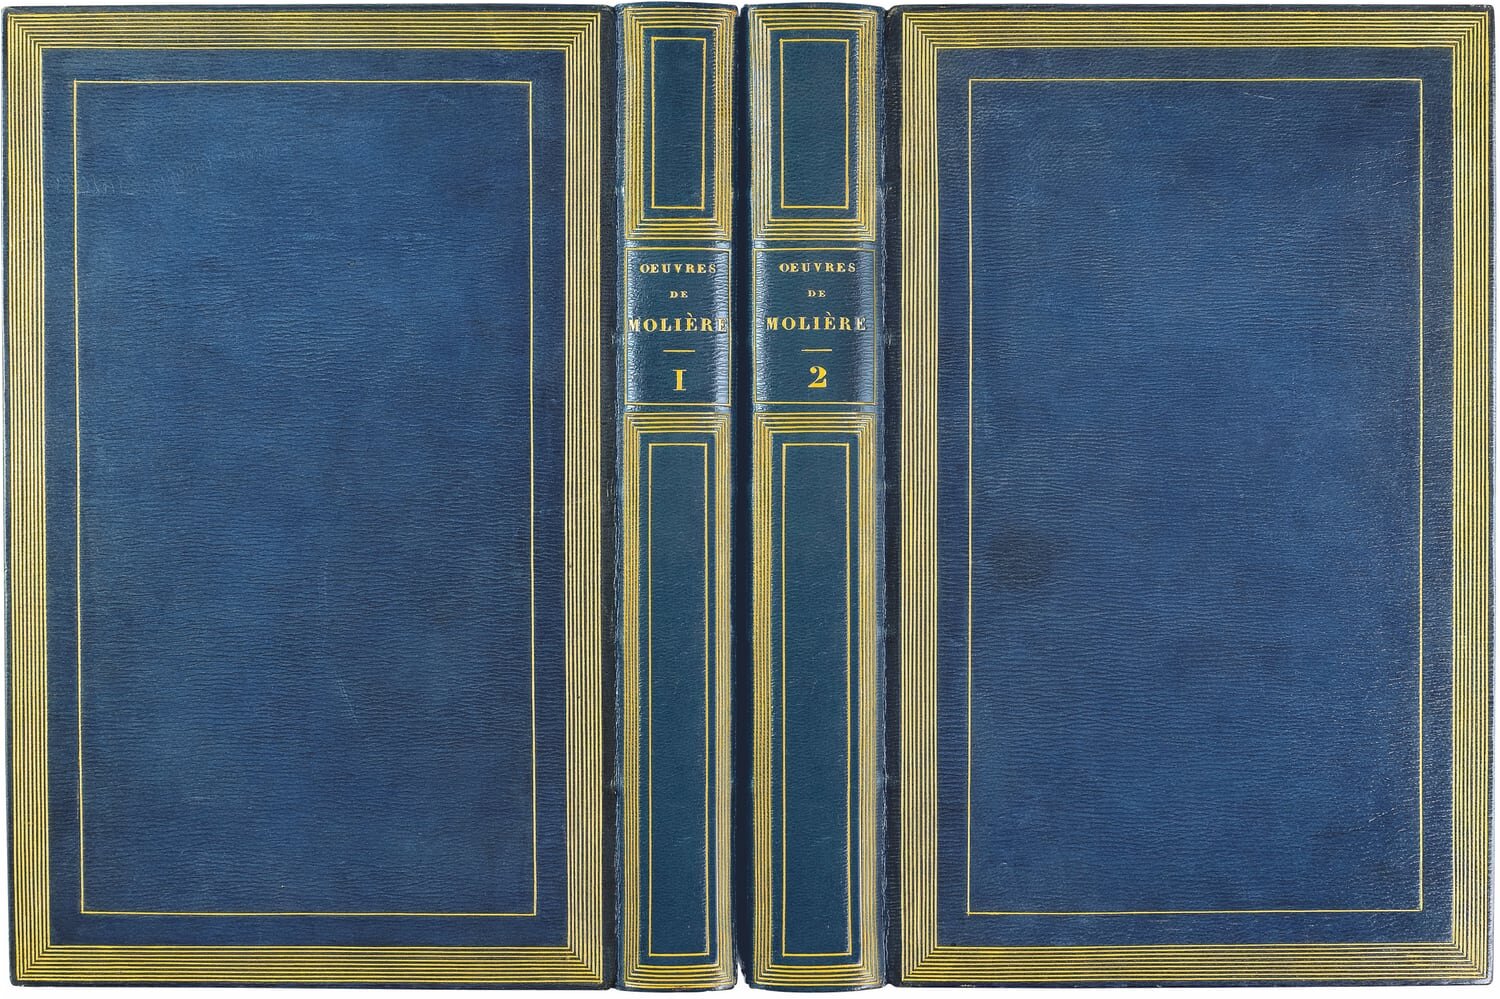  Extremely rare copies of Molière on China paper; in steel-blue morocco bindings by Bauzonnet [no. 454], and another copy in red morocco bindings by Émile Mercier [no. 452] 